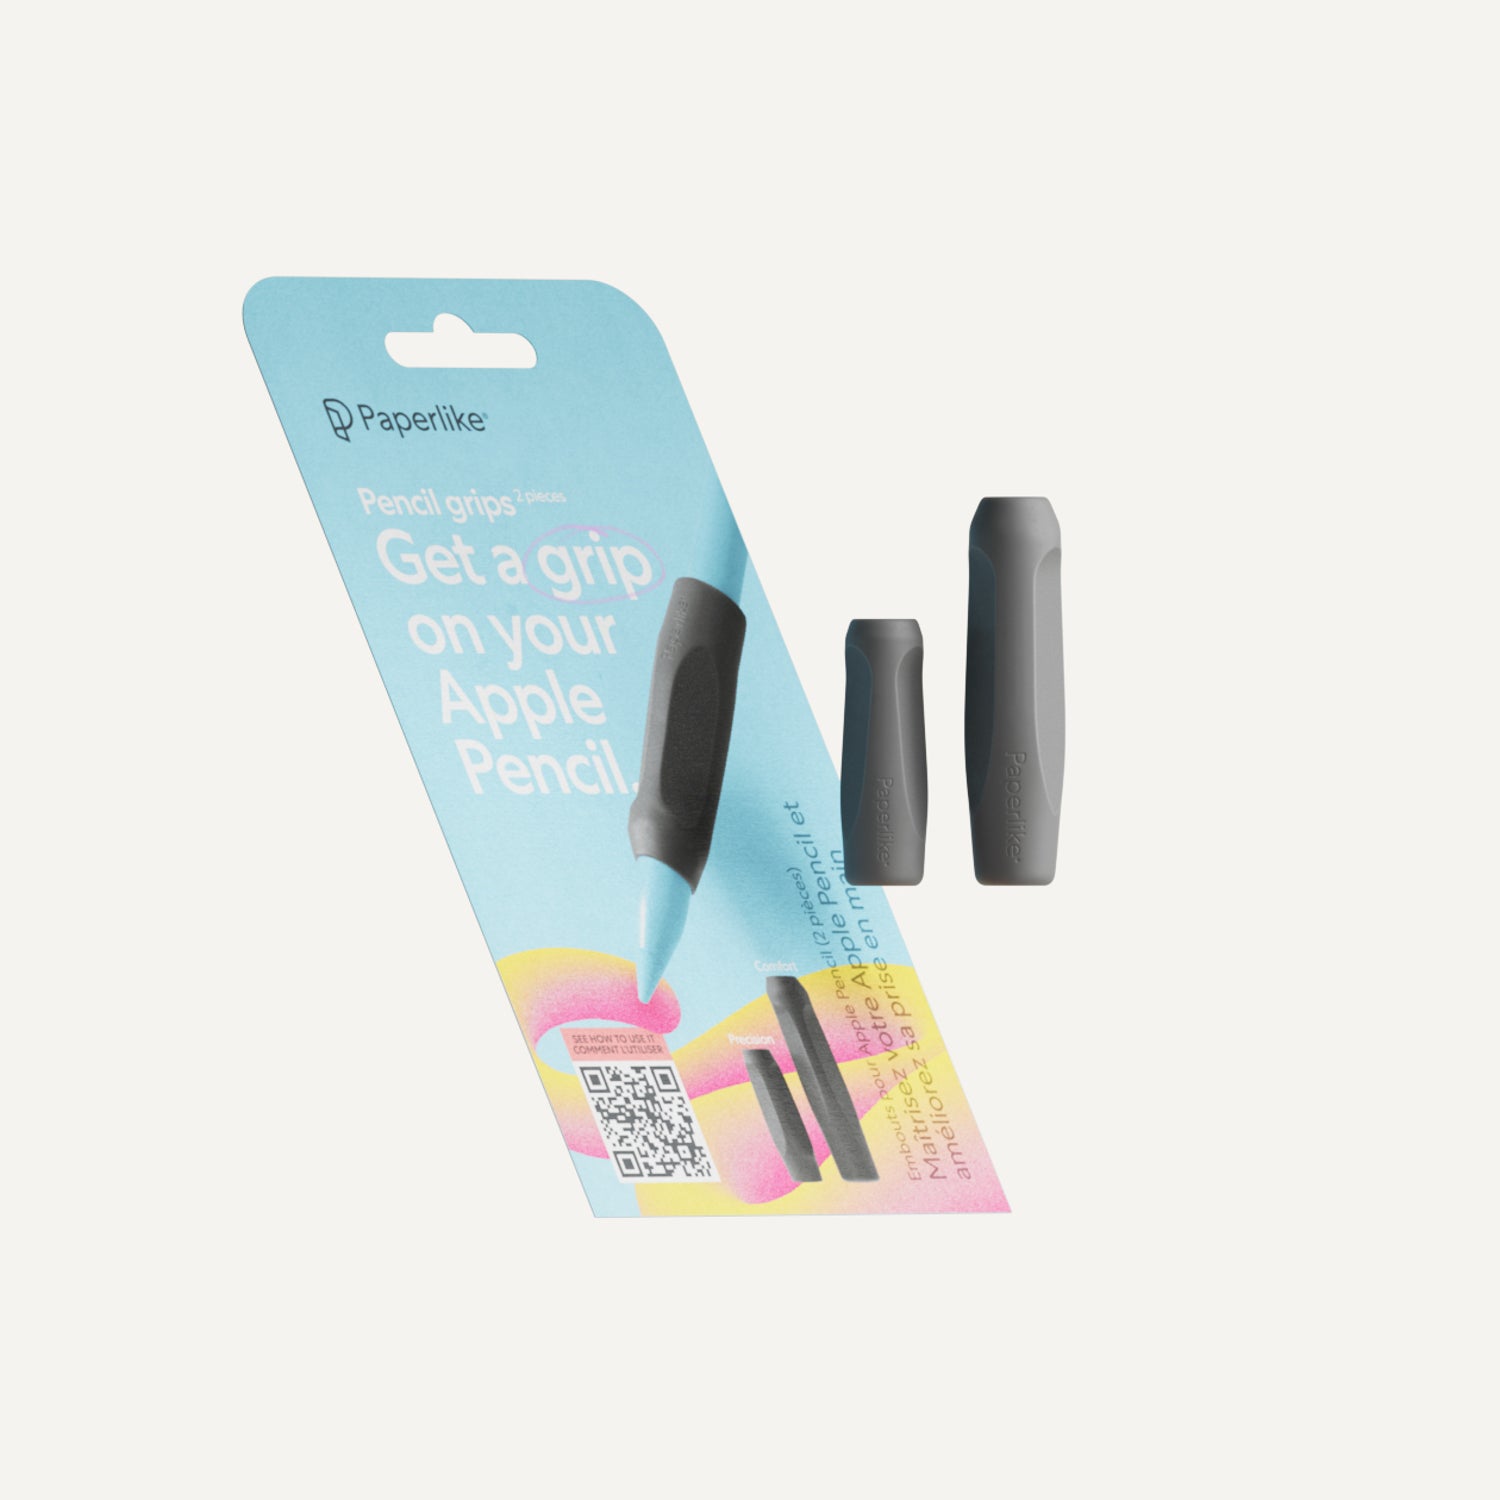 Charcoal pencil grips with packaging